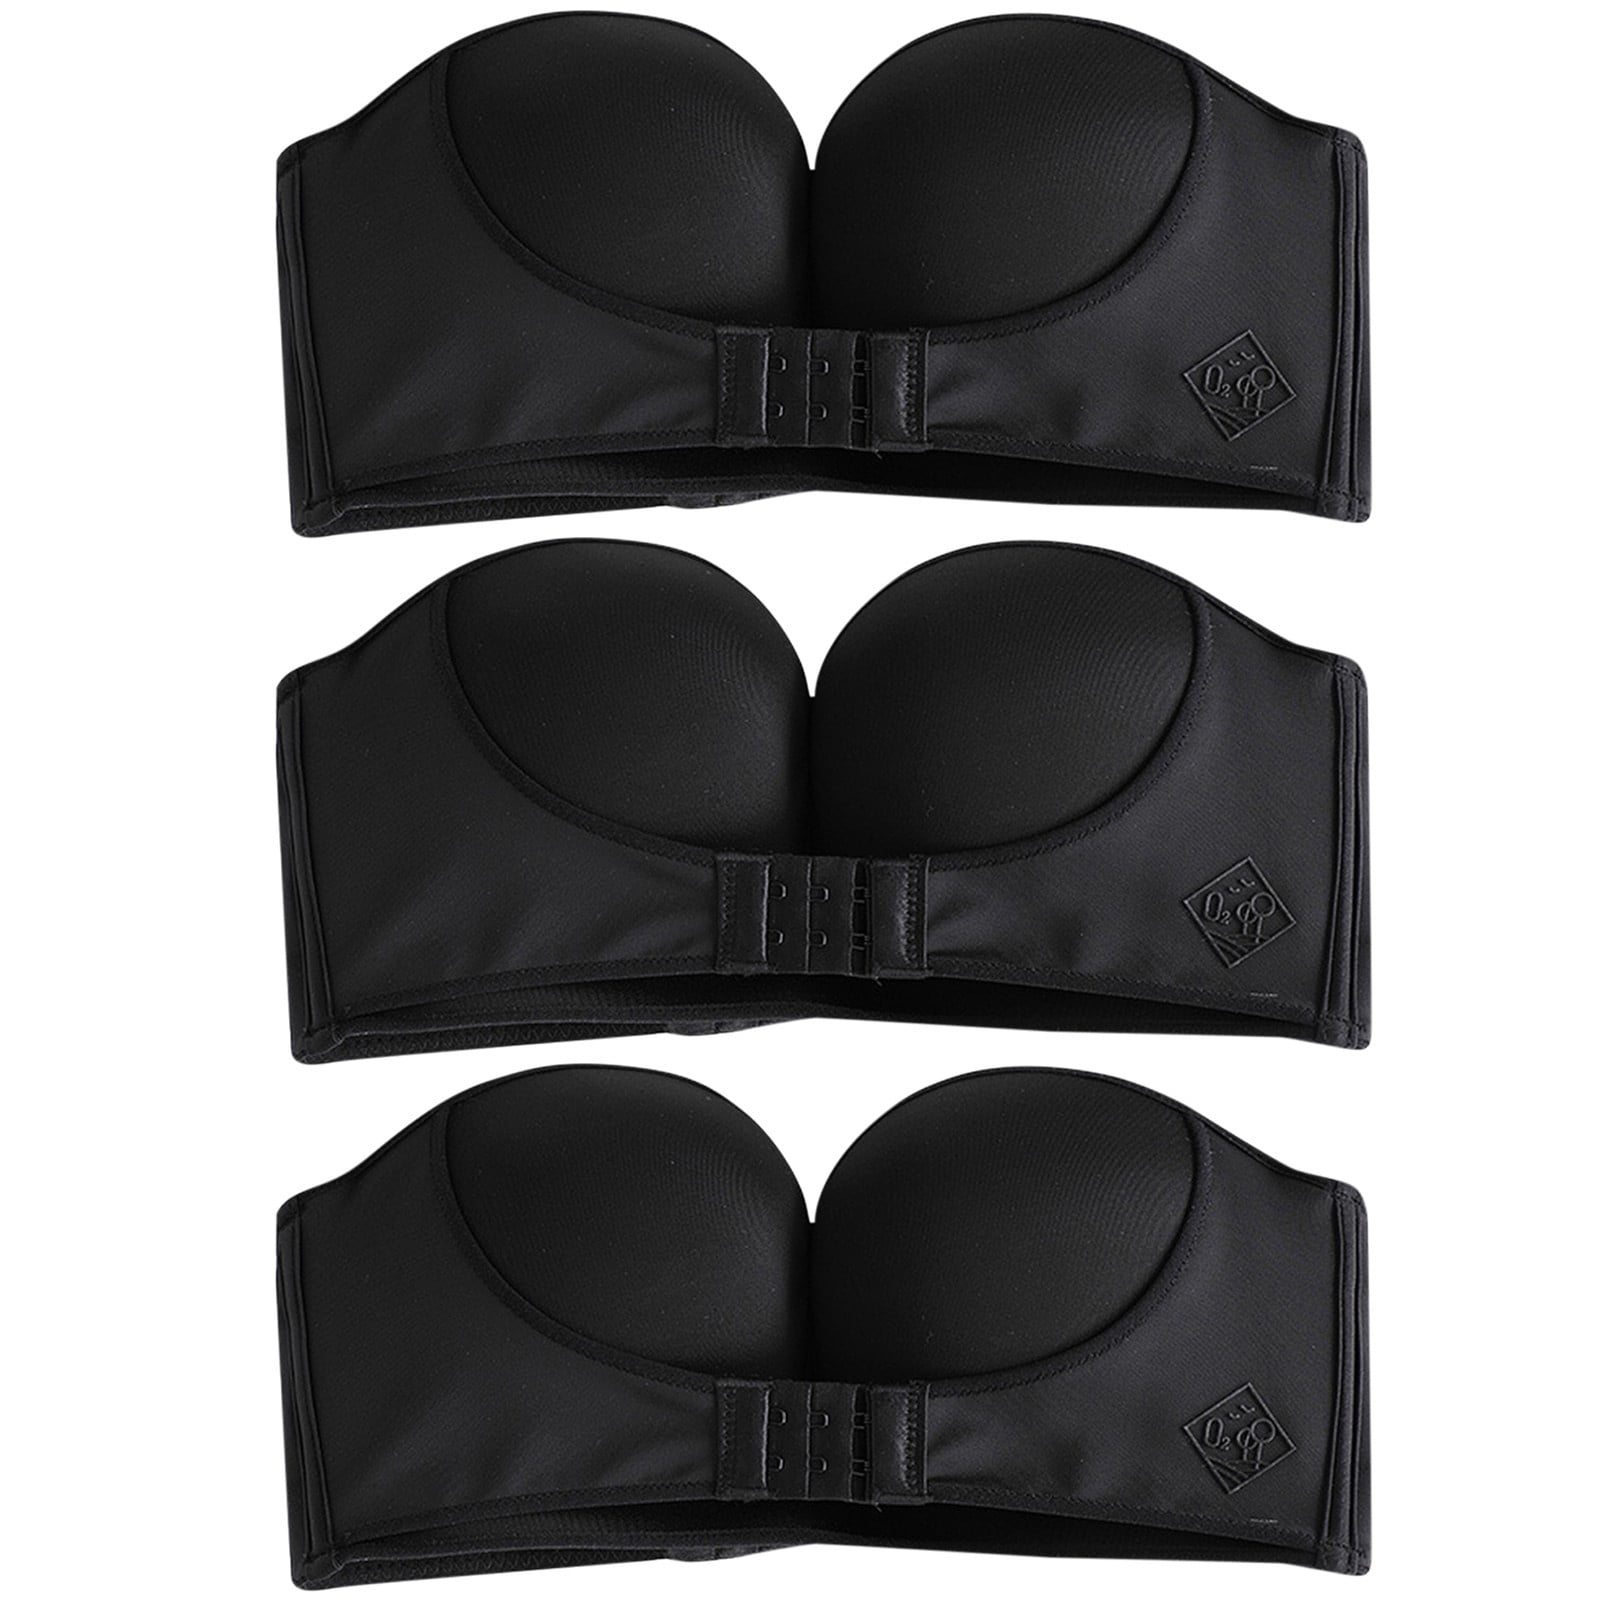 🔥Last Day Promotion 75% OFF⇝Bra with shapewear incorporated – skrttw